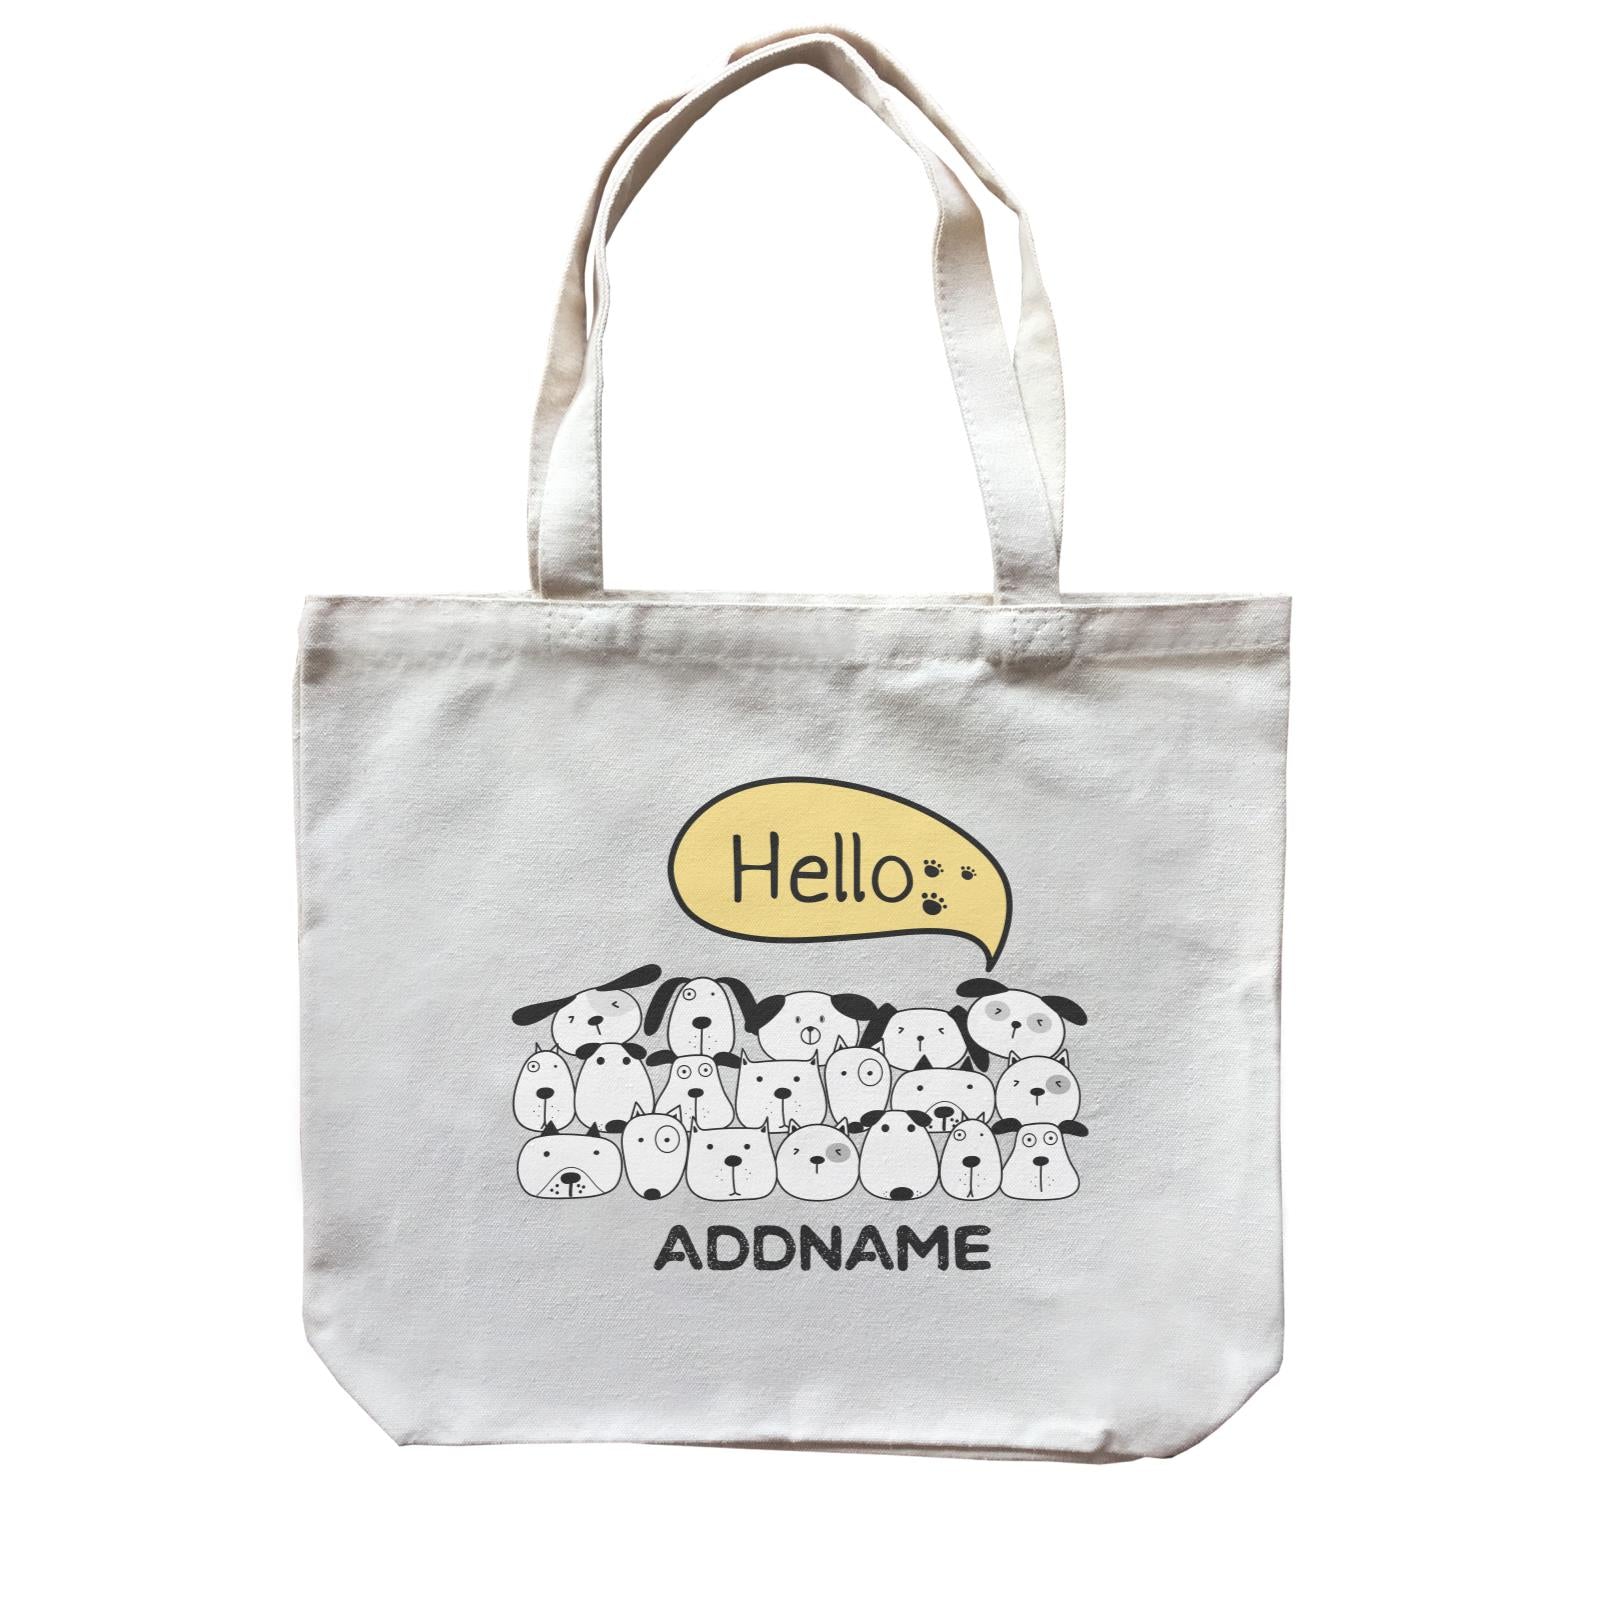 Cute Animals And Friends Series Hello Dogs Group Addname Canvas Bag